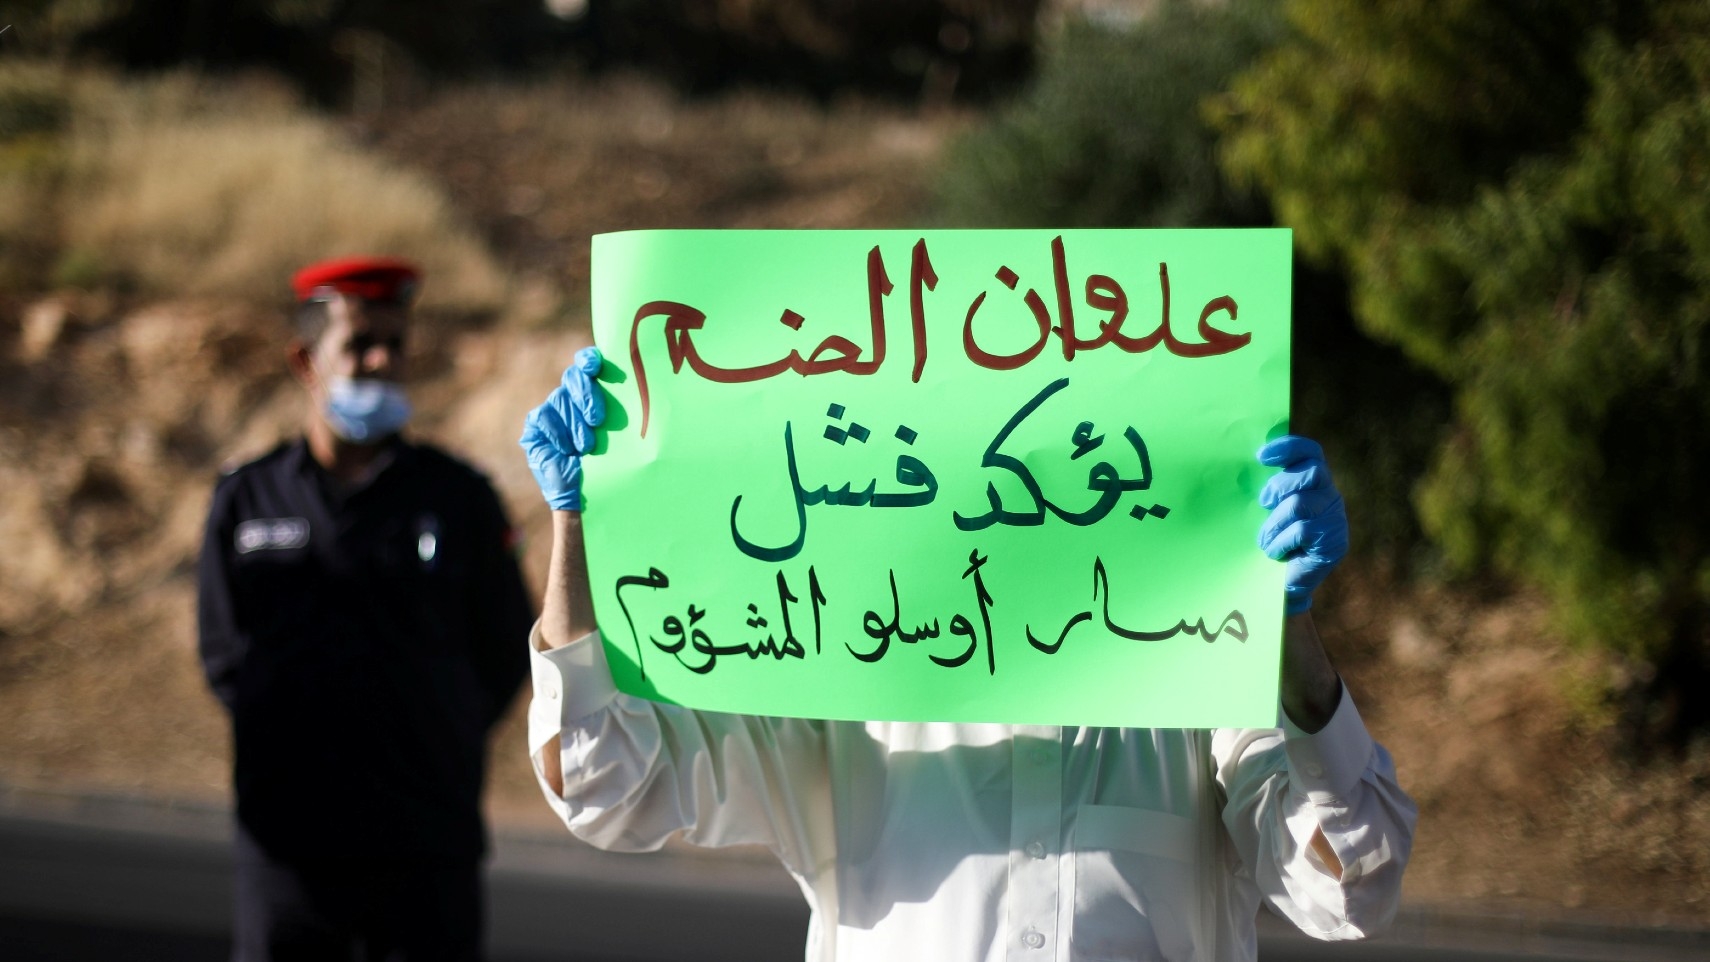 A protester holds a placard as he takes part in a demonstration against the annexation of parts of the West Bank by Israel, in Amman, Jordan, in June 2020